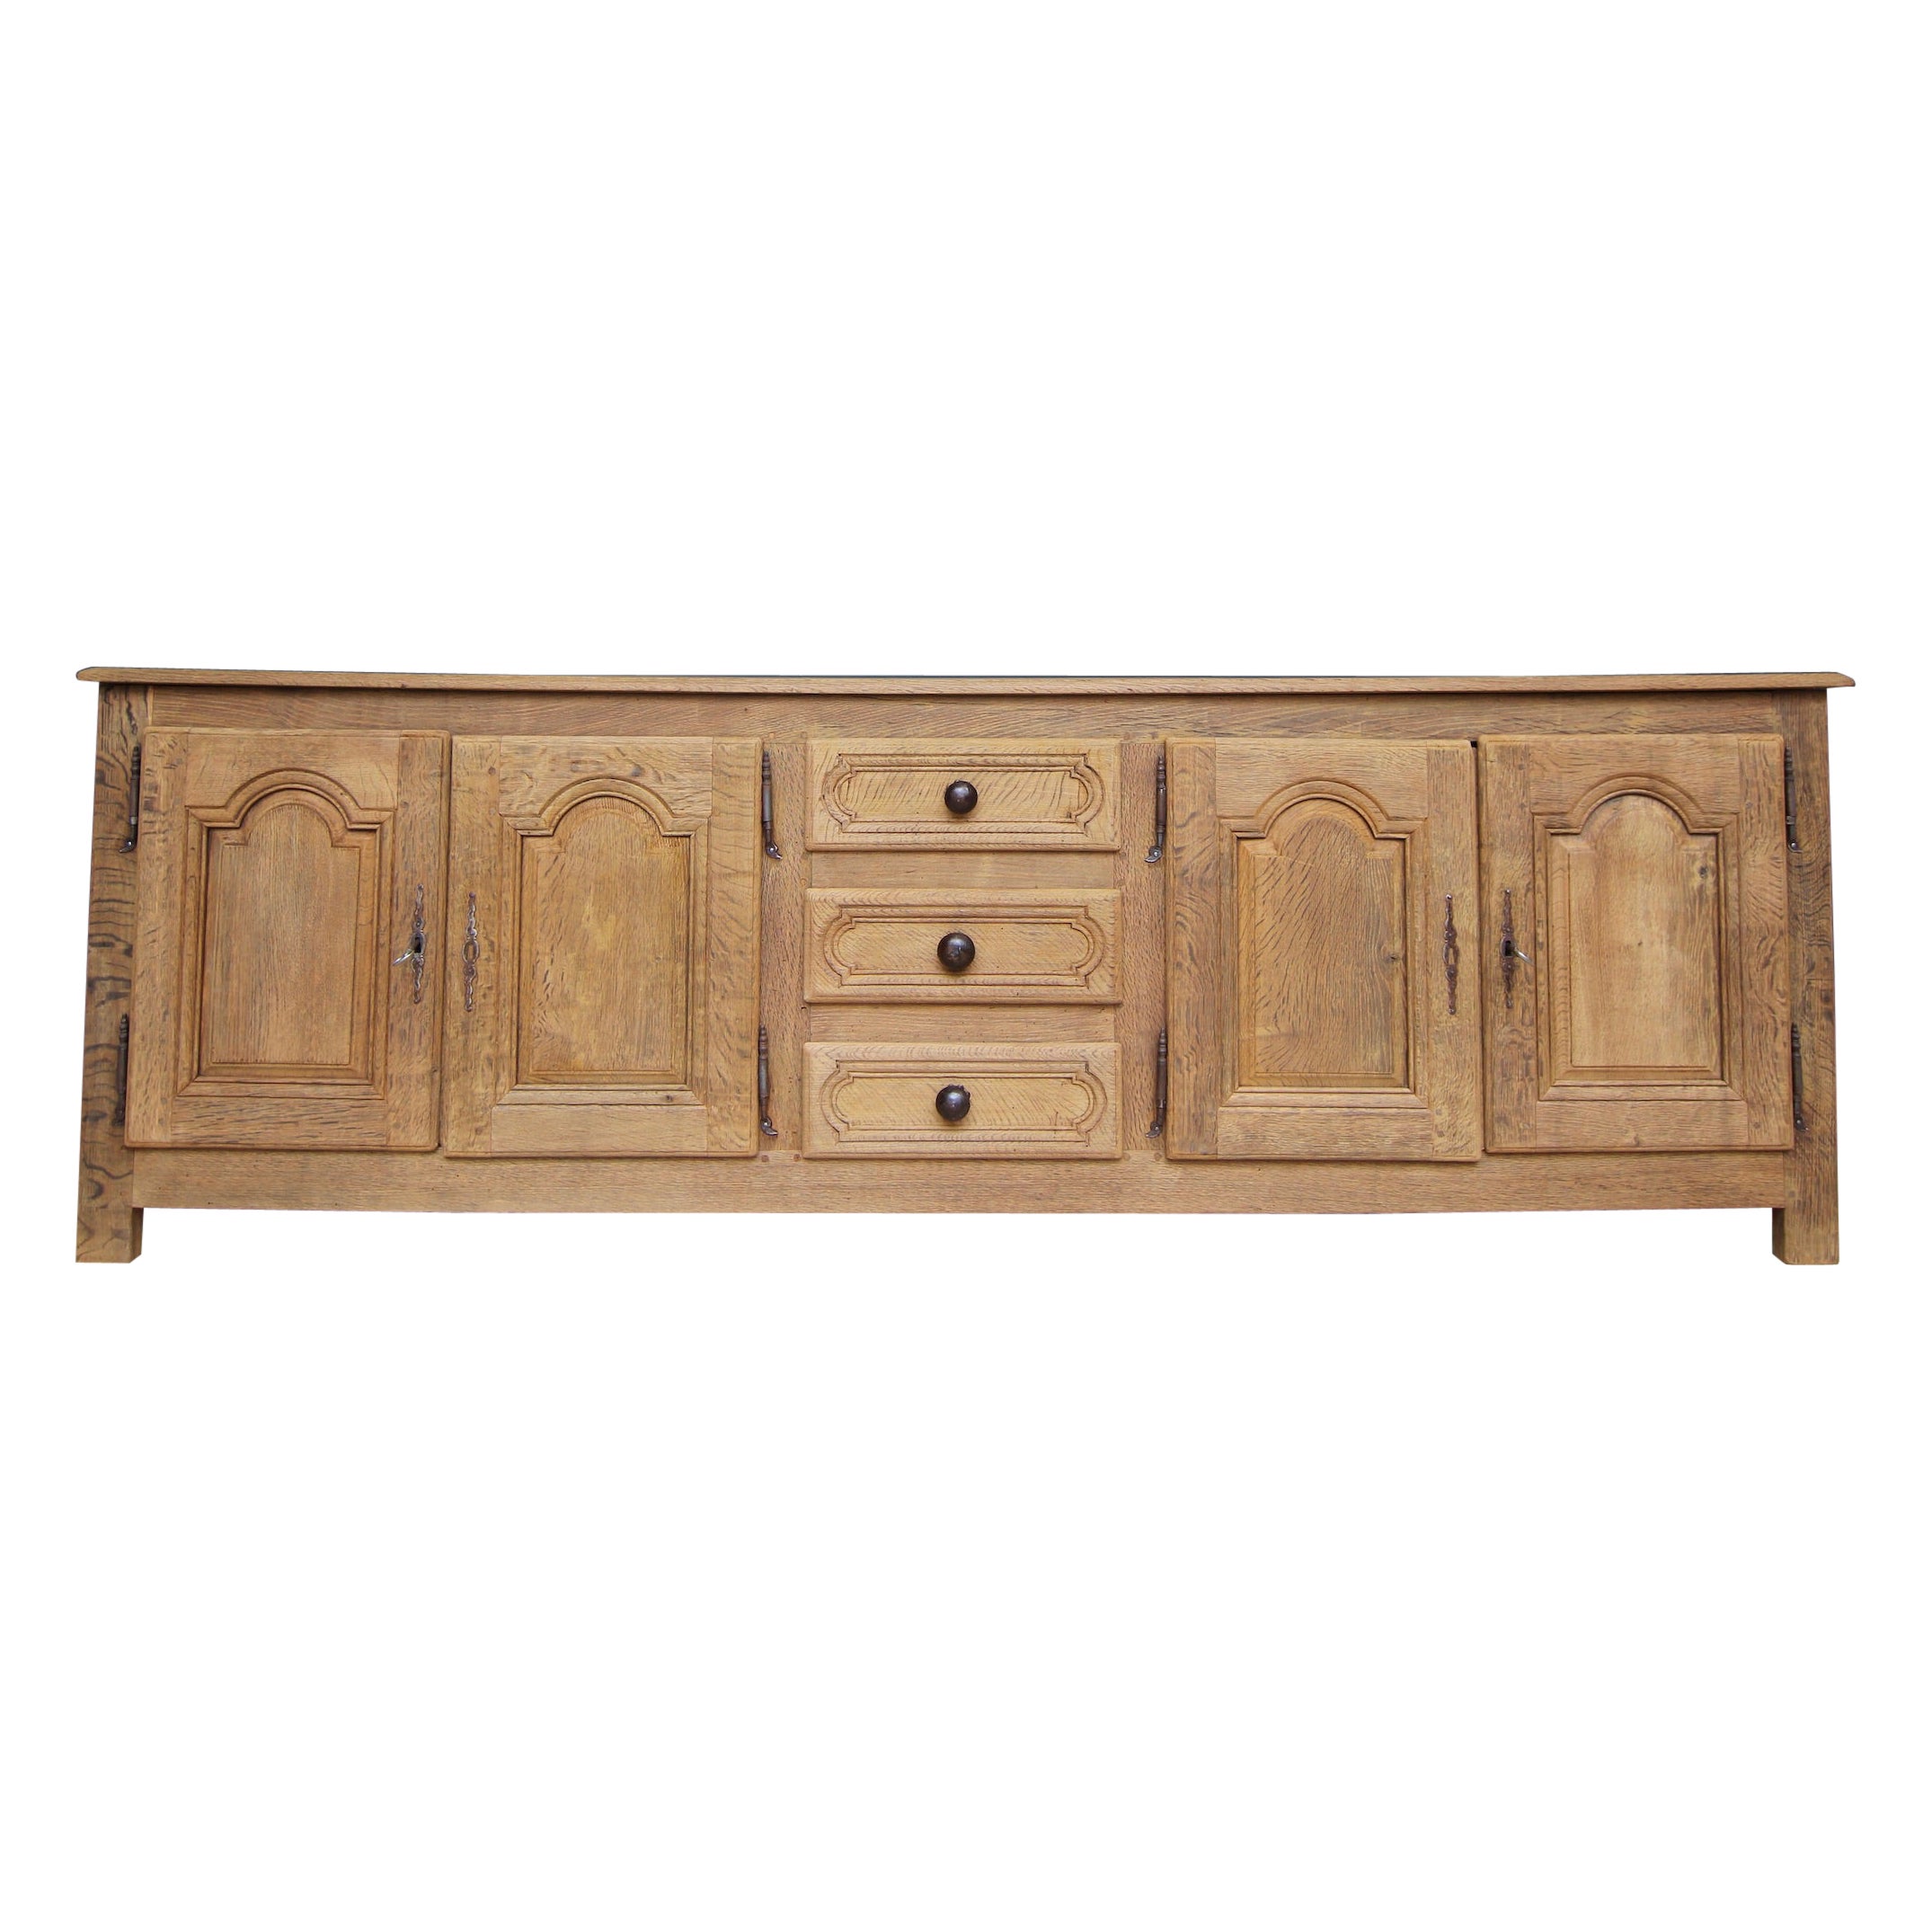 Early 19th Century French Stripped Oak Enfilade Sideboard